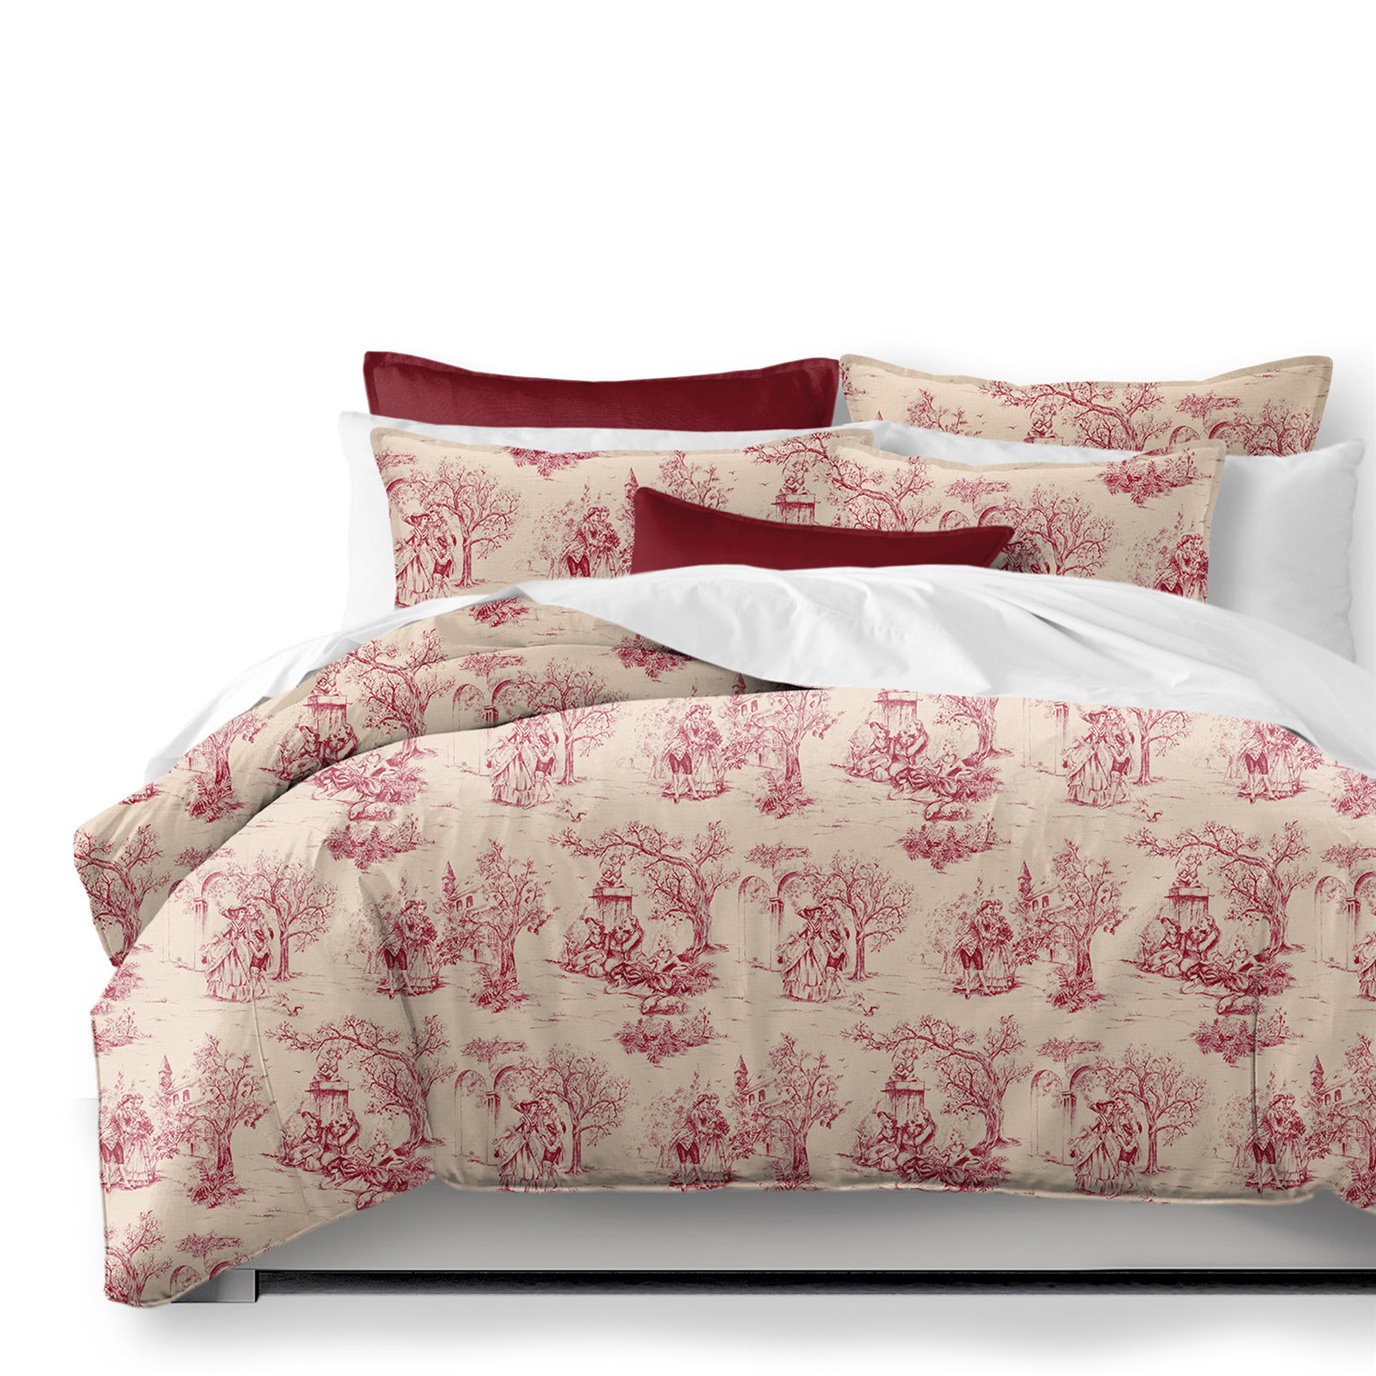 Archamps Toile Red Comforter and Pillow Sham(s) Set - Size Super Queen